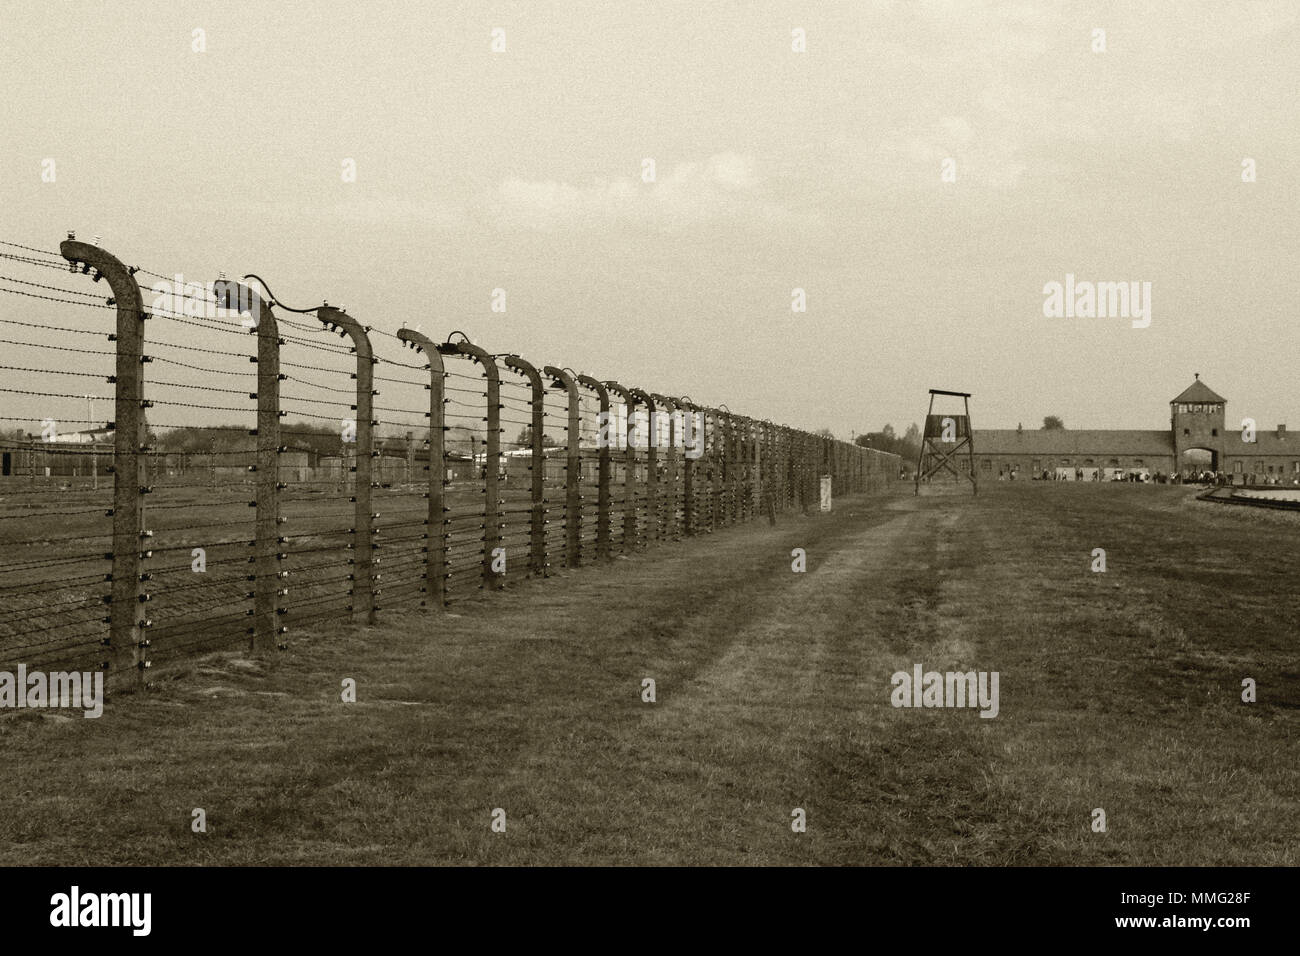 AUSCHWITZ, POLAND, OCTOBER 12, 2013: Fence and watchtower at concentration camp at Auschwitz Birkenau KZ, black white and beige duplex processing photography with image noise effect, Poland Stock Photo